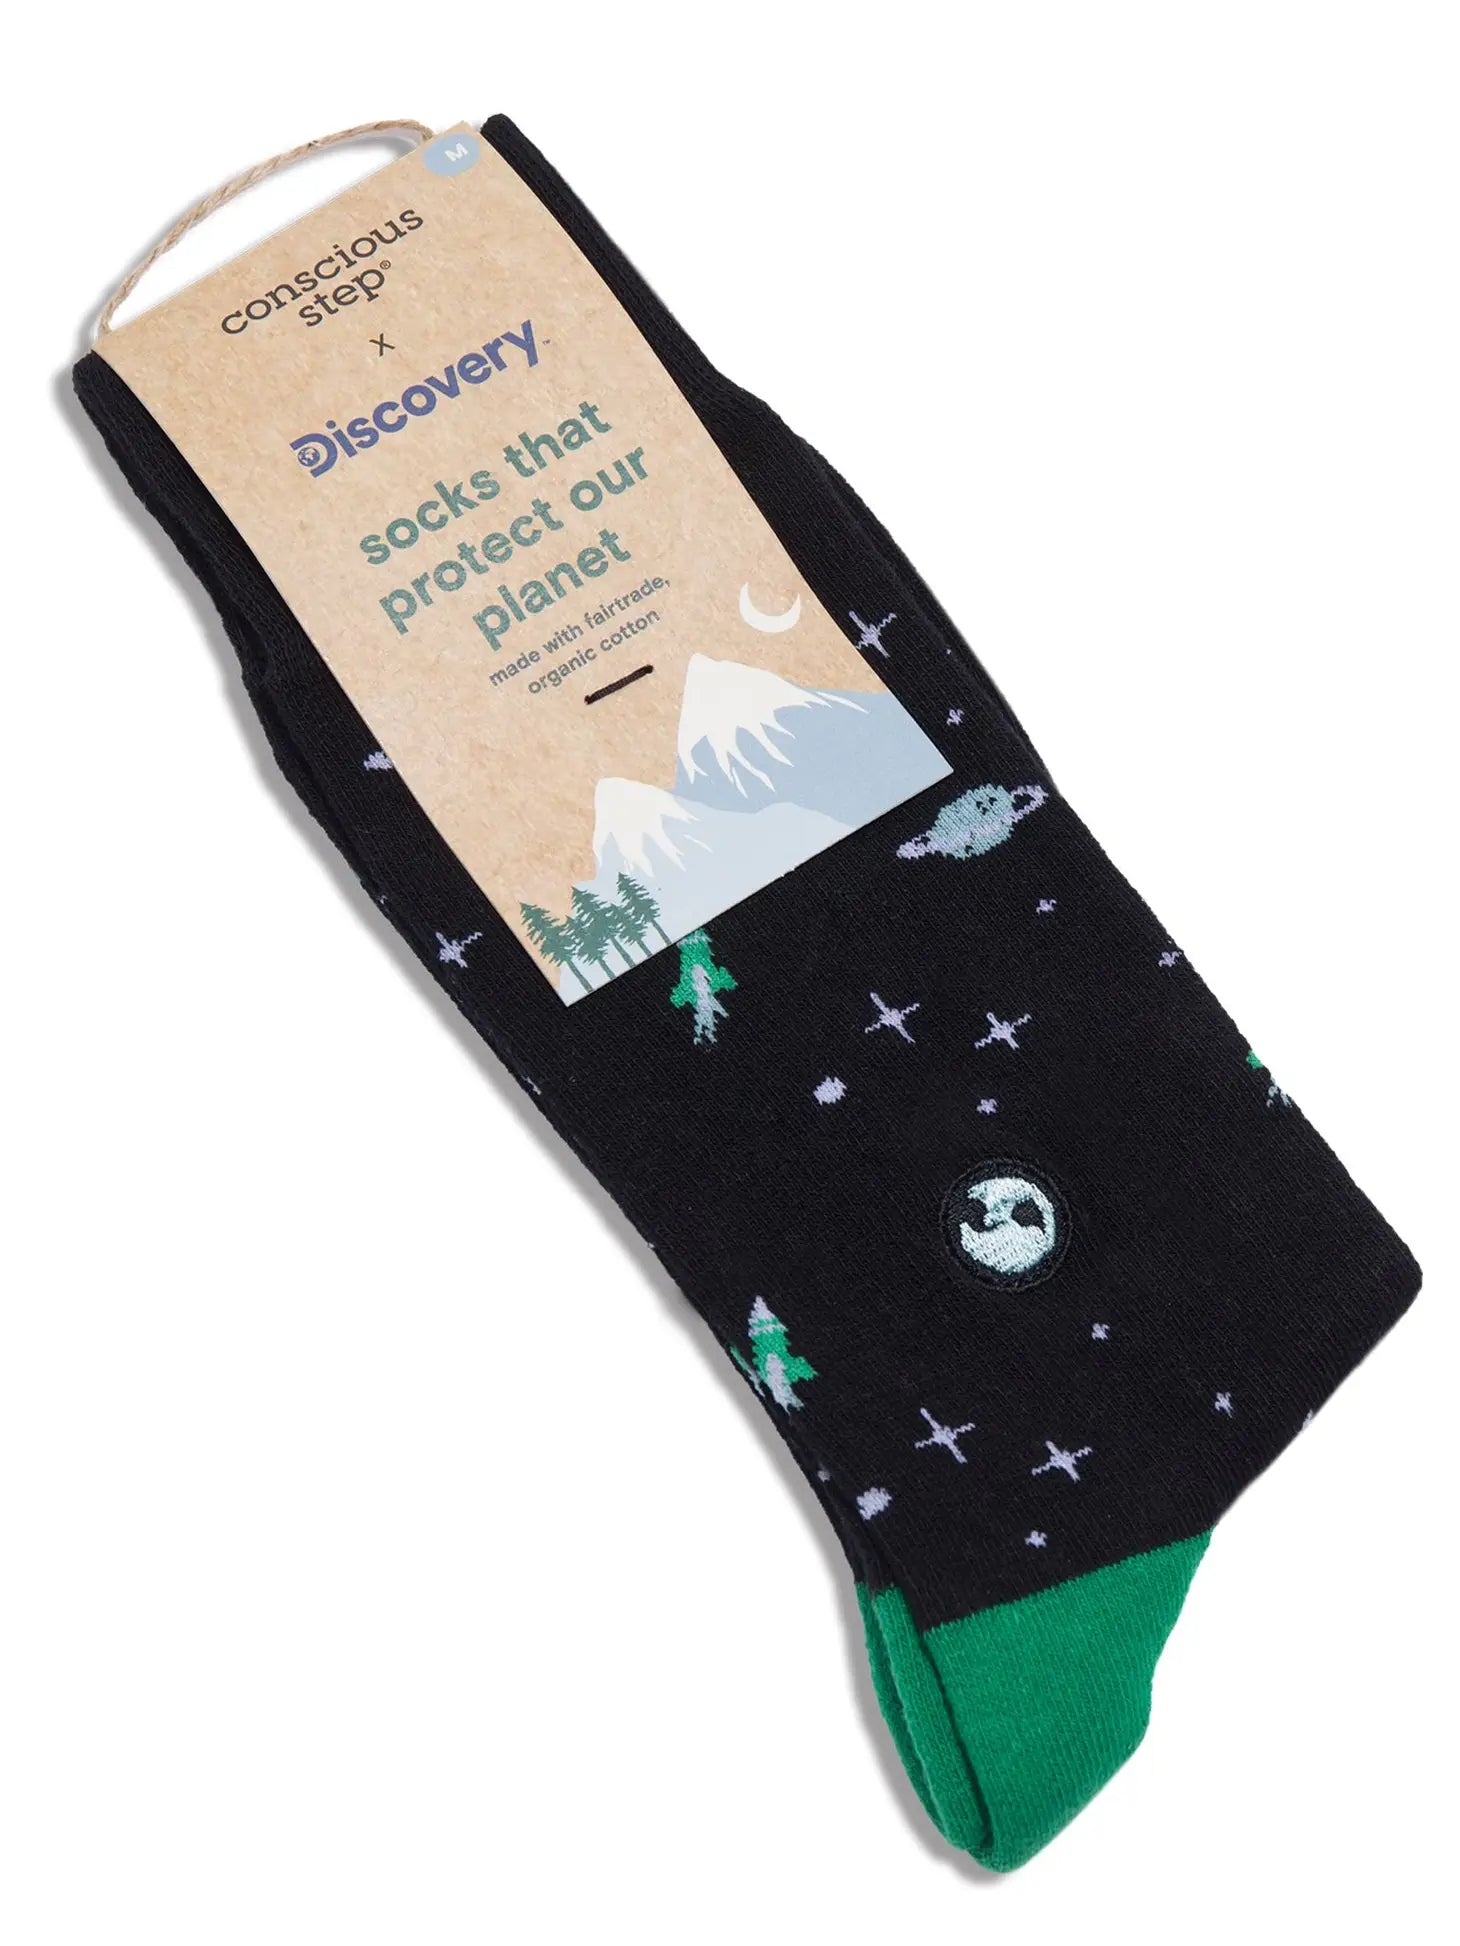 Socks that Protect our Planet in Black Galaxy in packaging